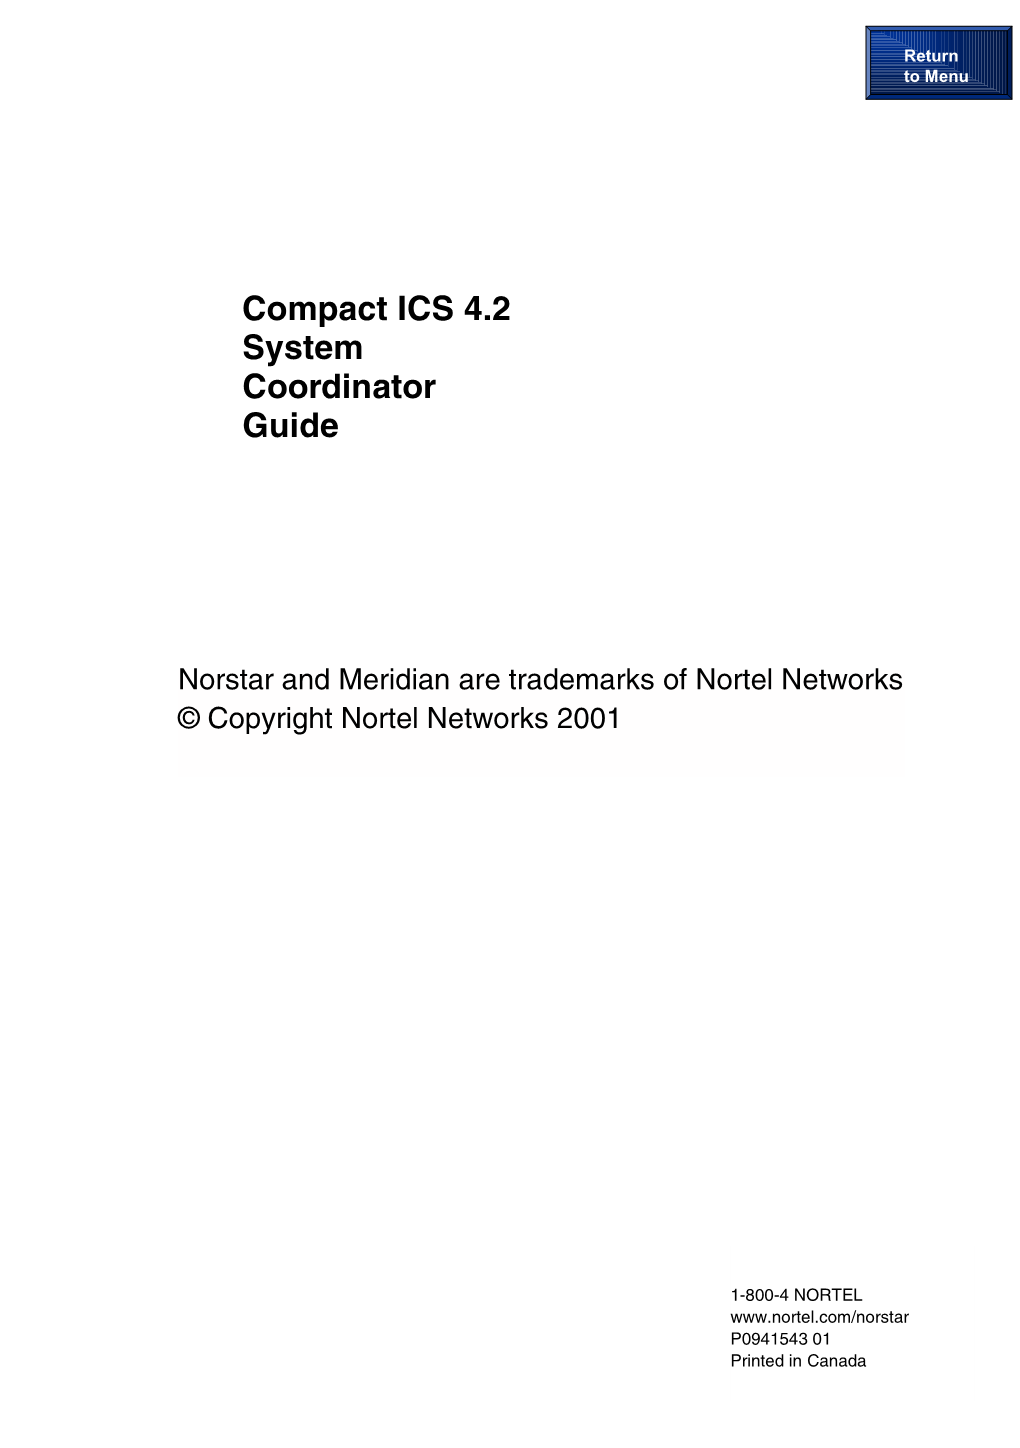 Compact ICS 4.2 System Coordinator Guide